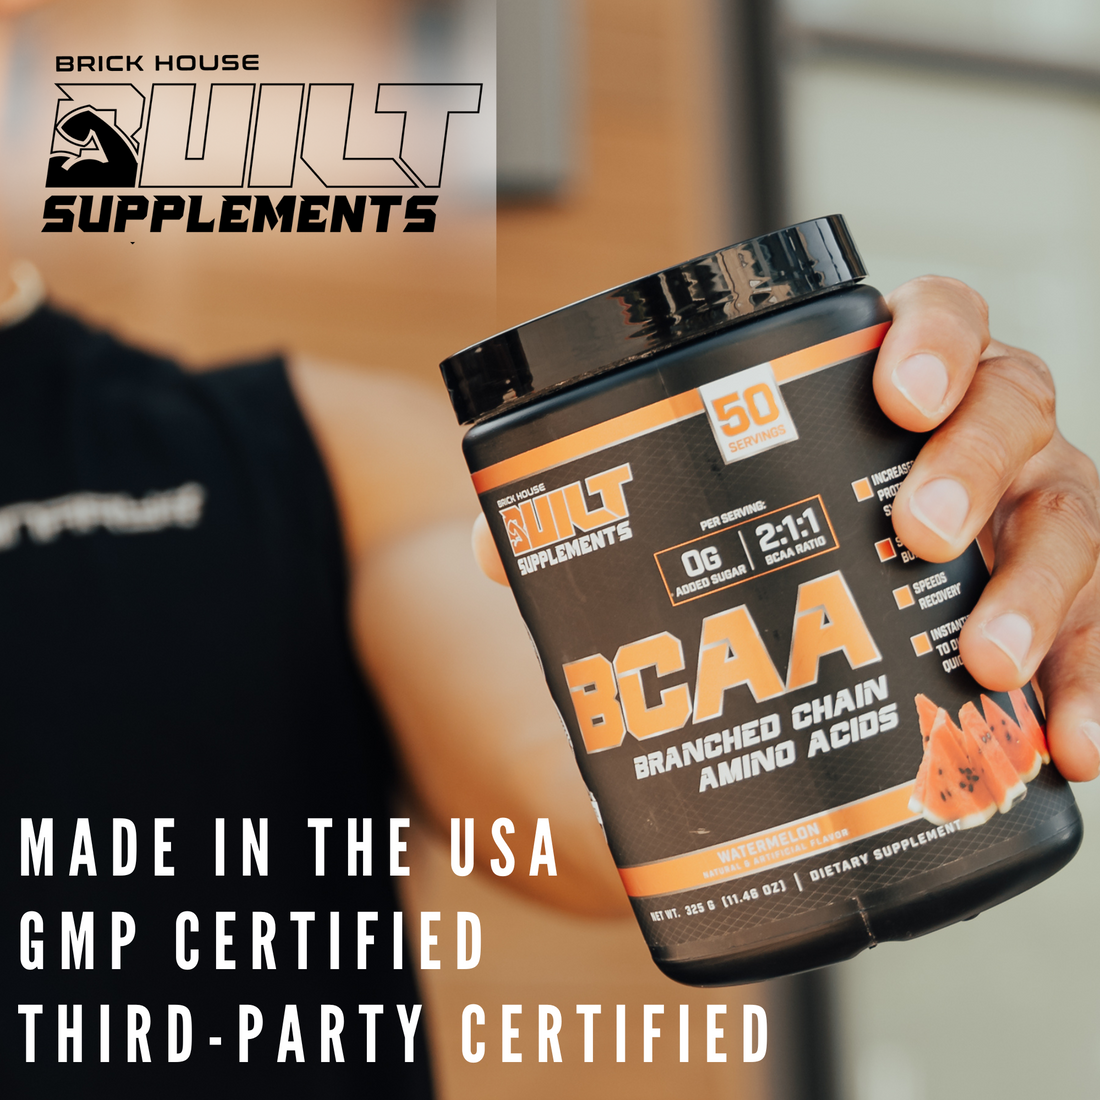 The Importance of BCAA's